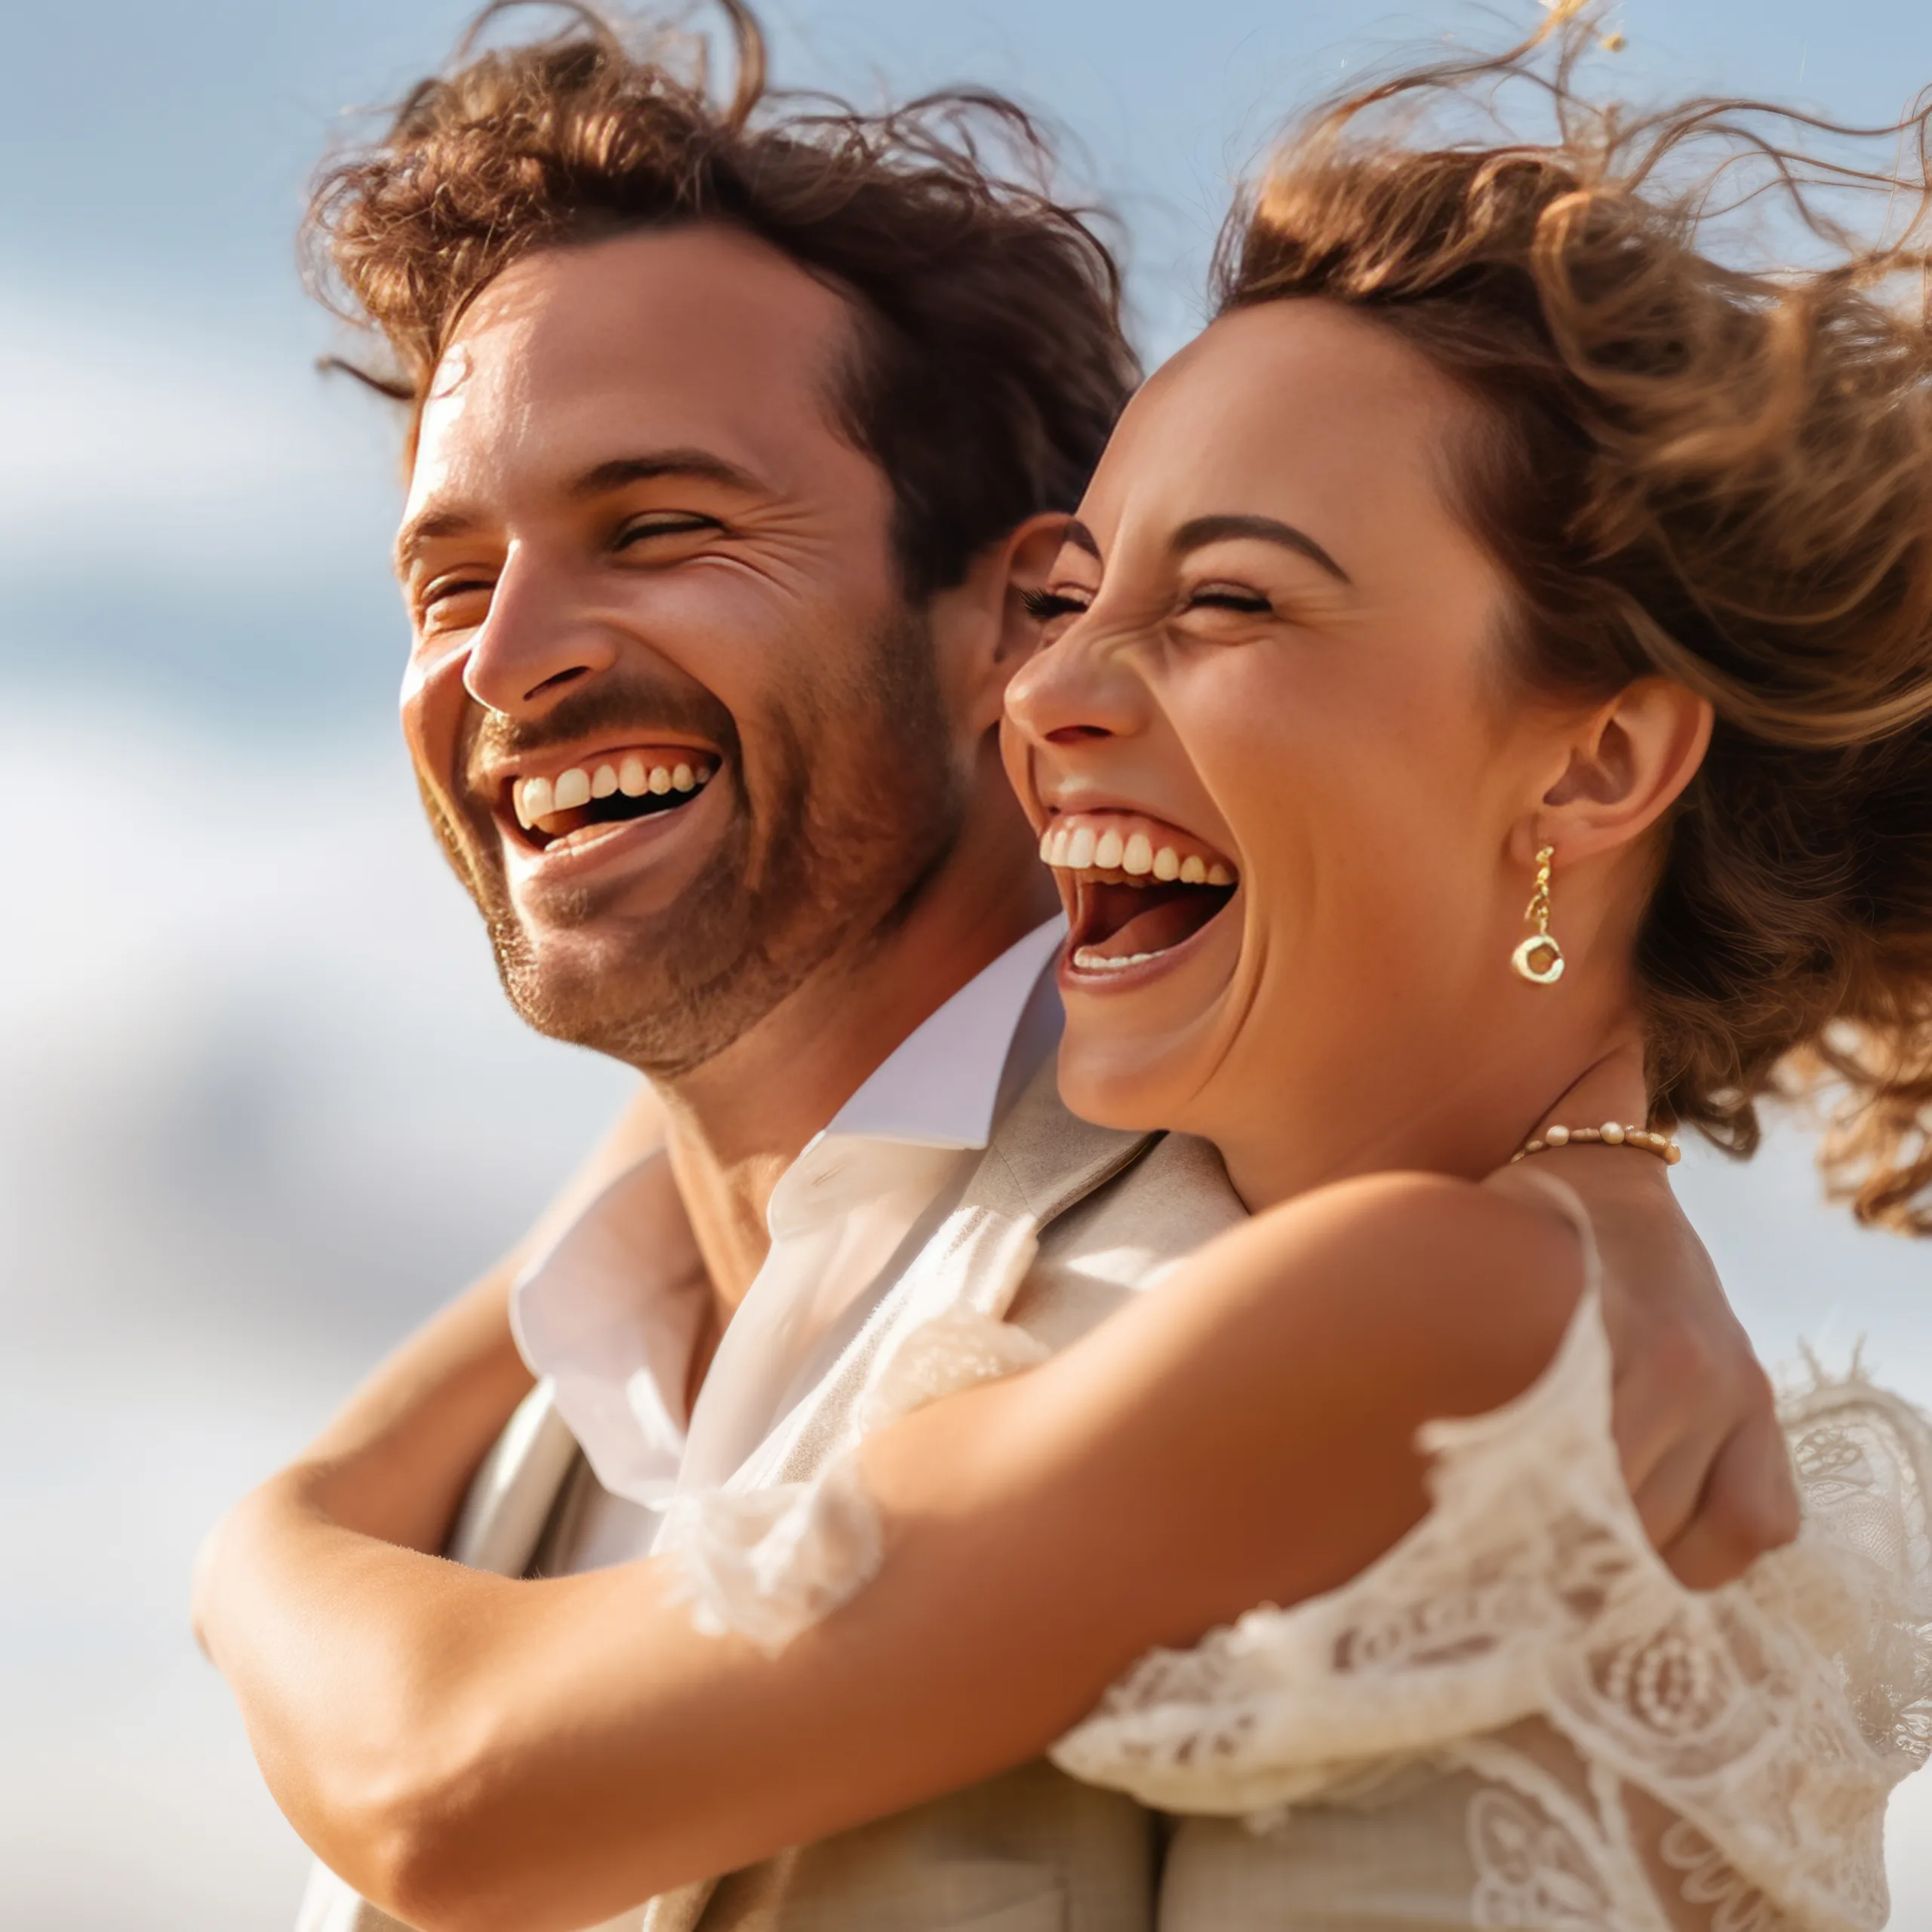 How to start a wedding business: Man and woman laughing